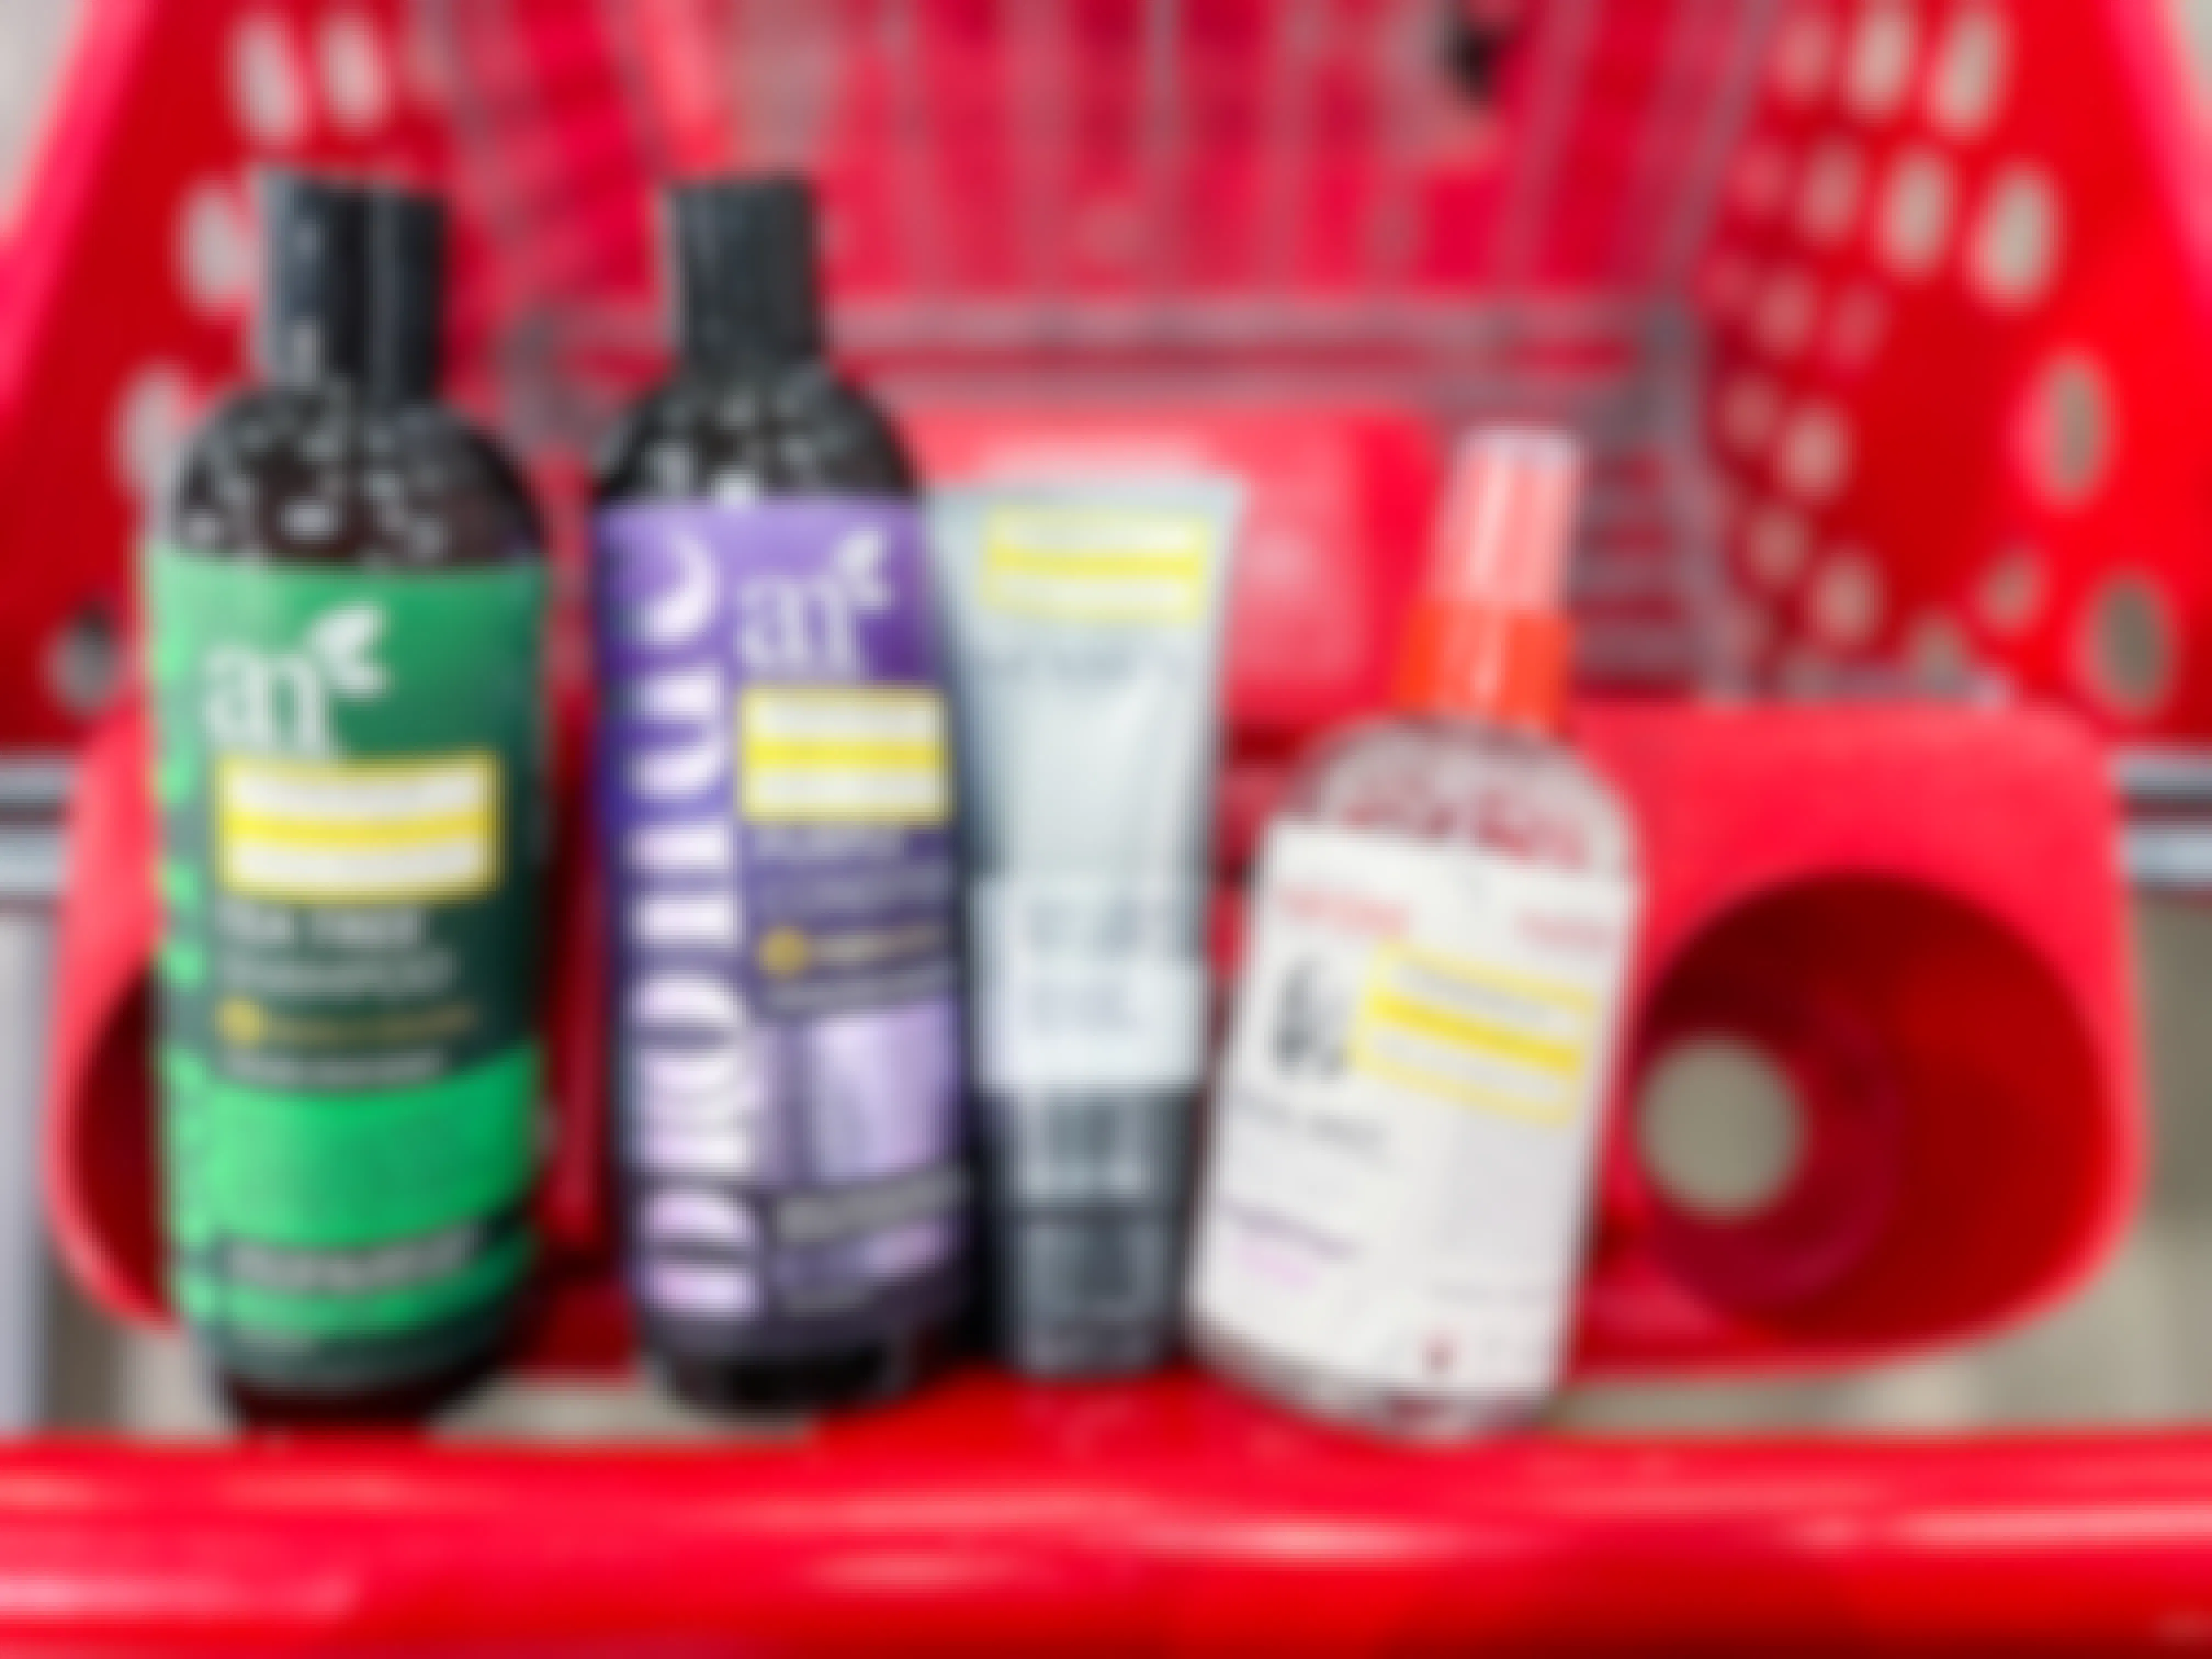 Clearance on skincare in target